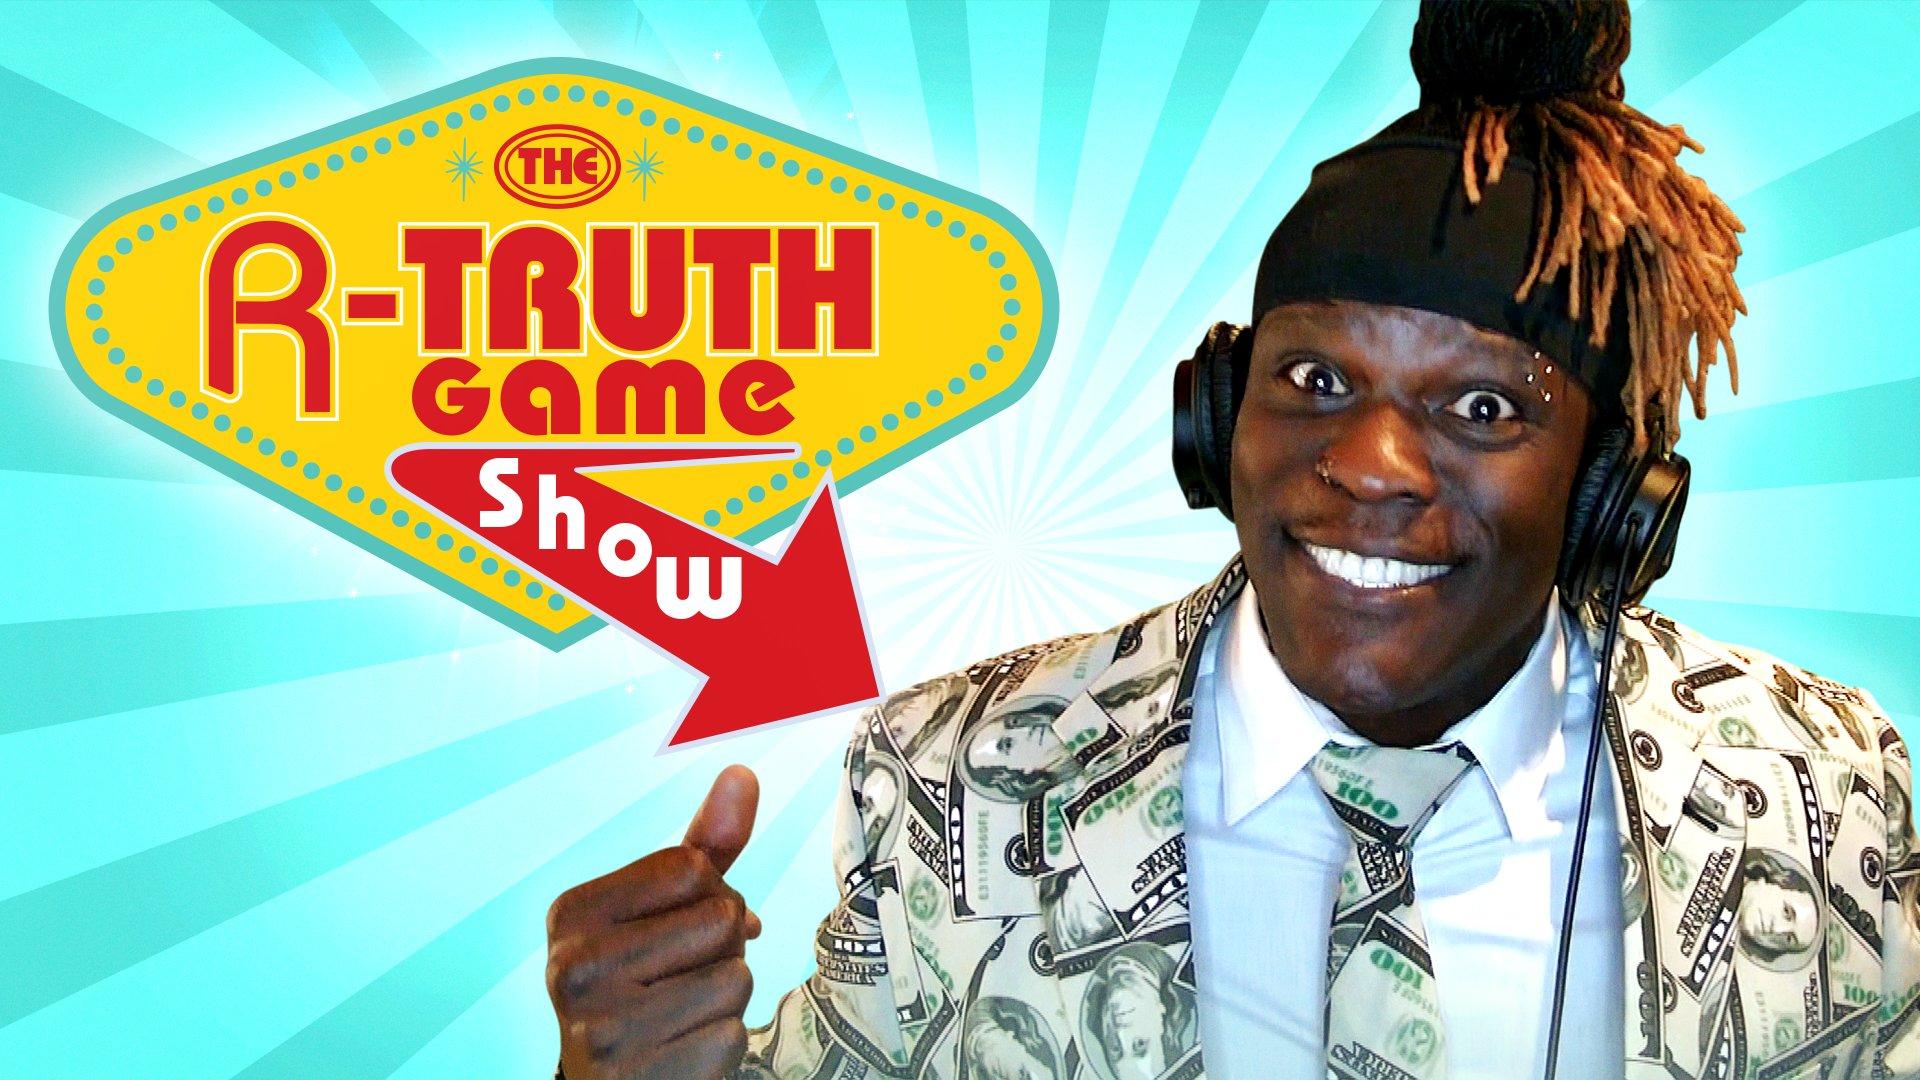 WWE: The R-Truth Game Show